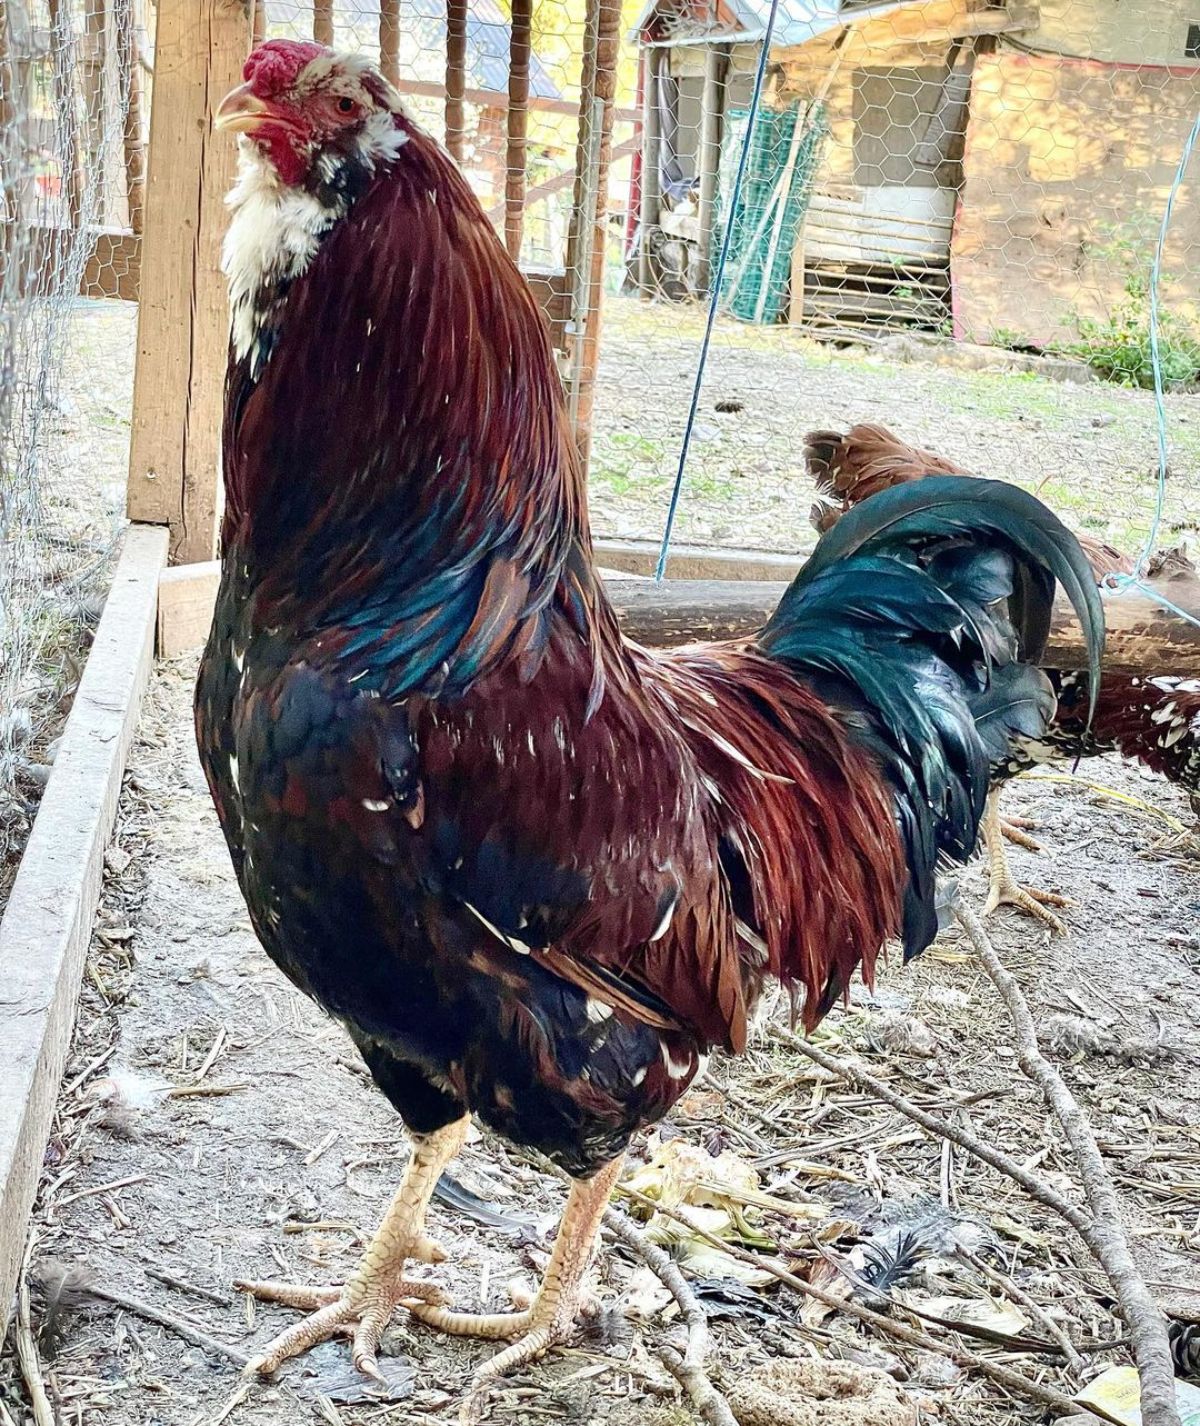 A big tall Orloff rooster in a chicken coop.